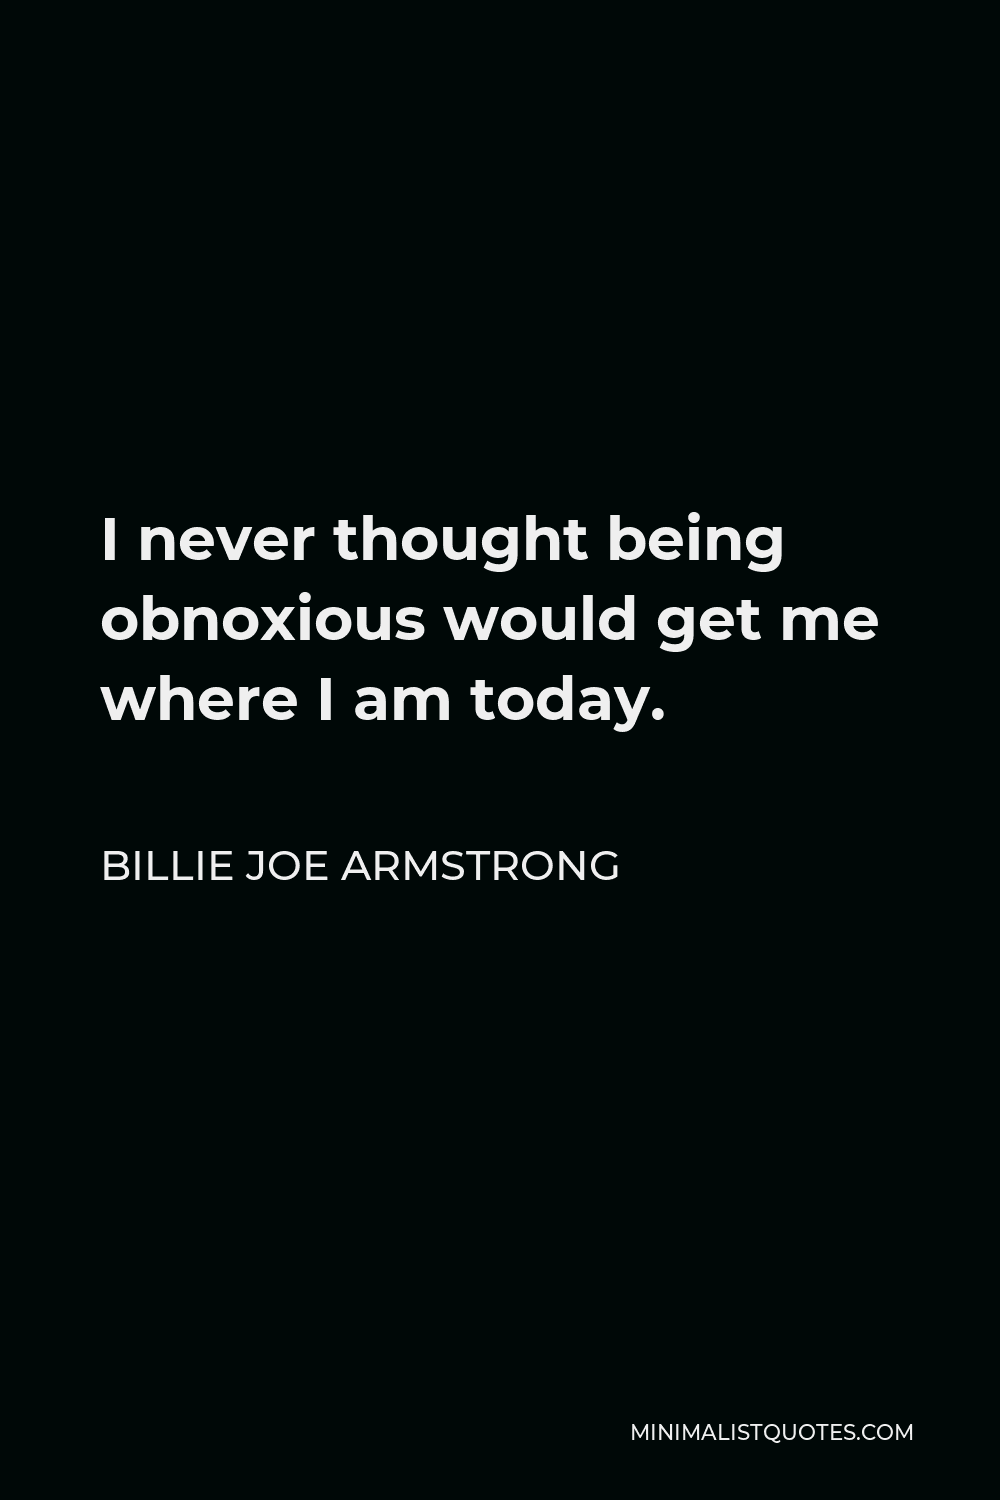 Billie Joe Armstrong Quote - I never thought being obnoxious would get me where I am today.